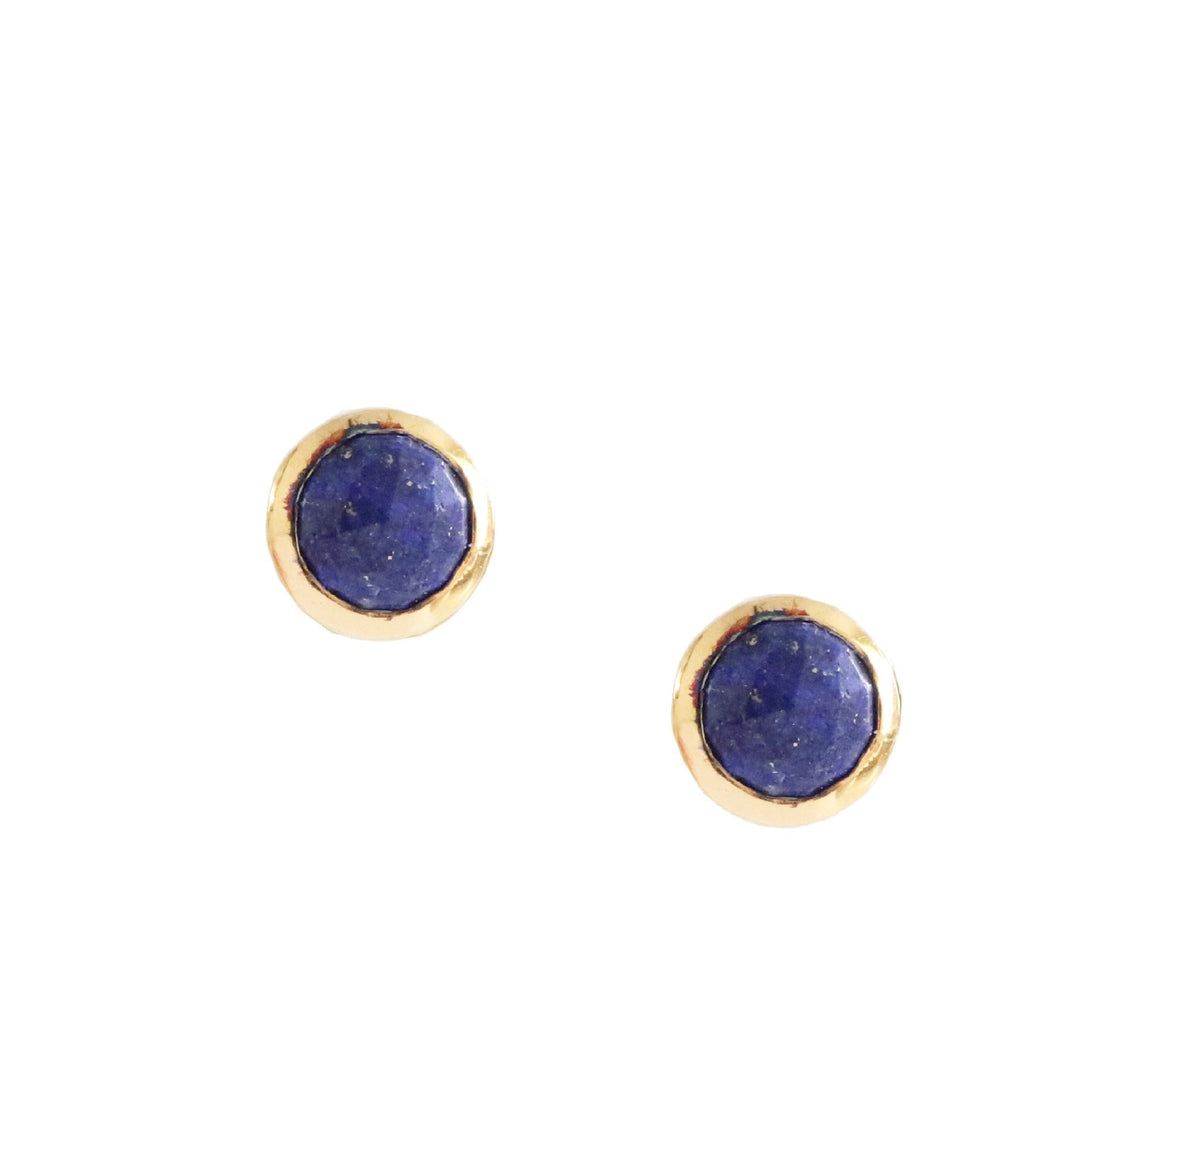 DAINTY LEGACY STUDS - LAPIS &amp; GOLD - SO PRETTY CARA COTTER